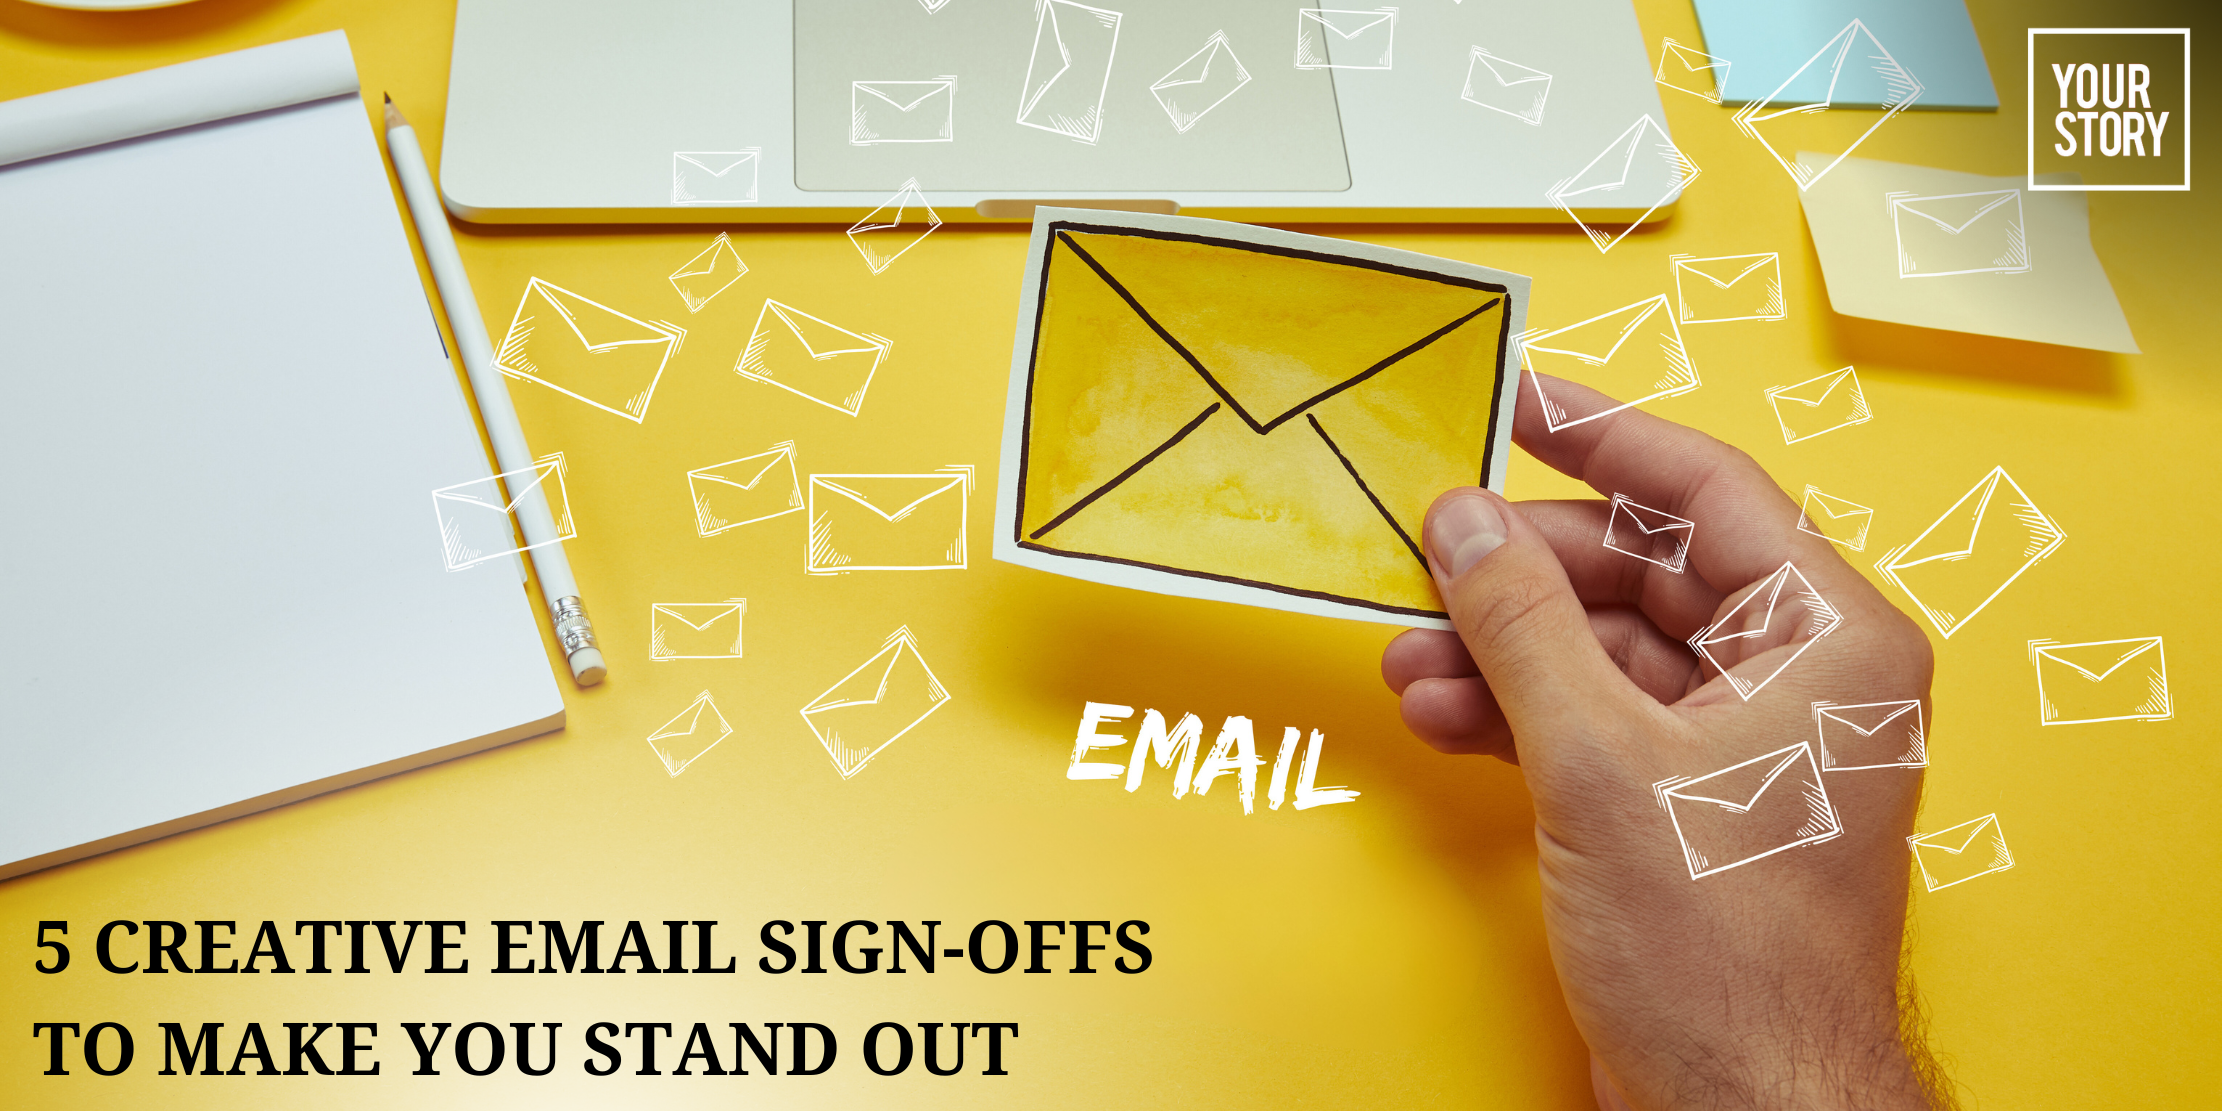 Ditch "Best Regards": 5 Creative Email Sign-Offs to Make You Stand Out